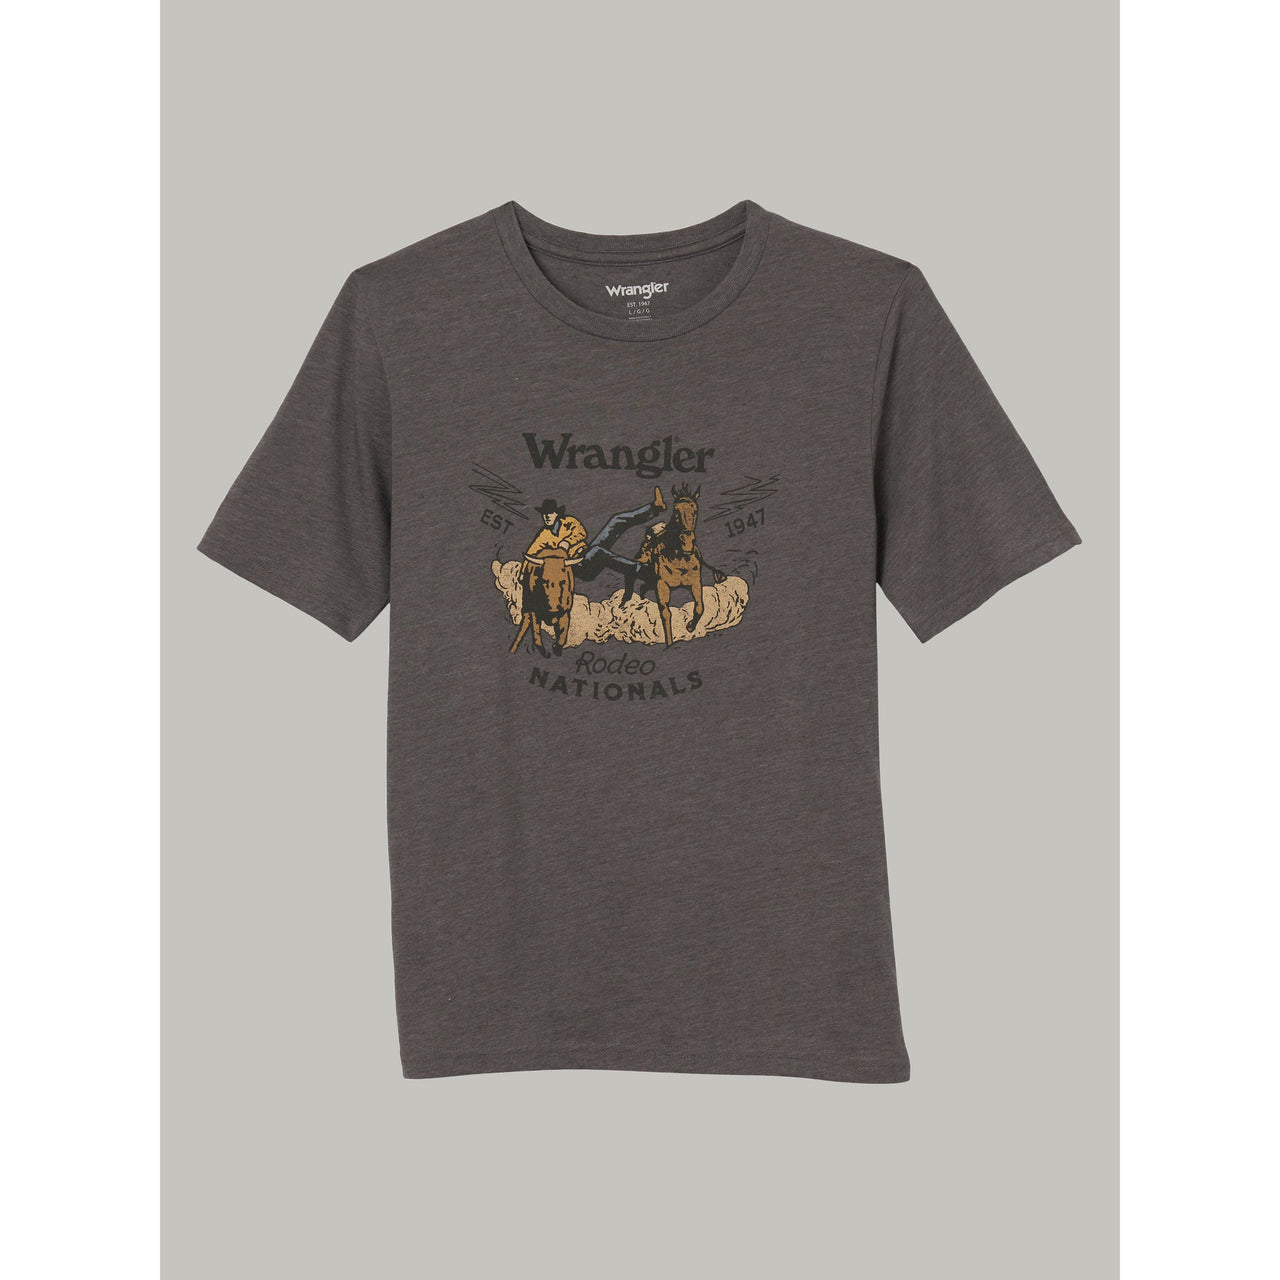 Wrangler Boy's Rodeo Nationals Graphic Tee - Brown